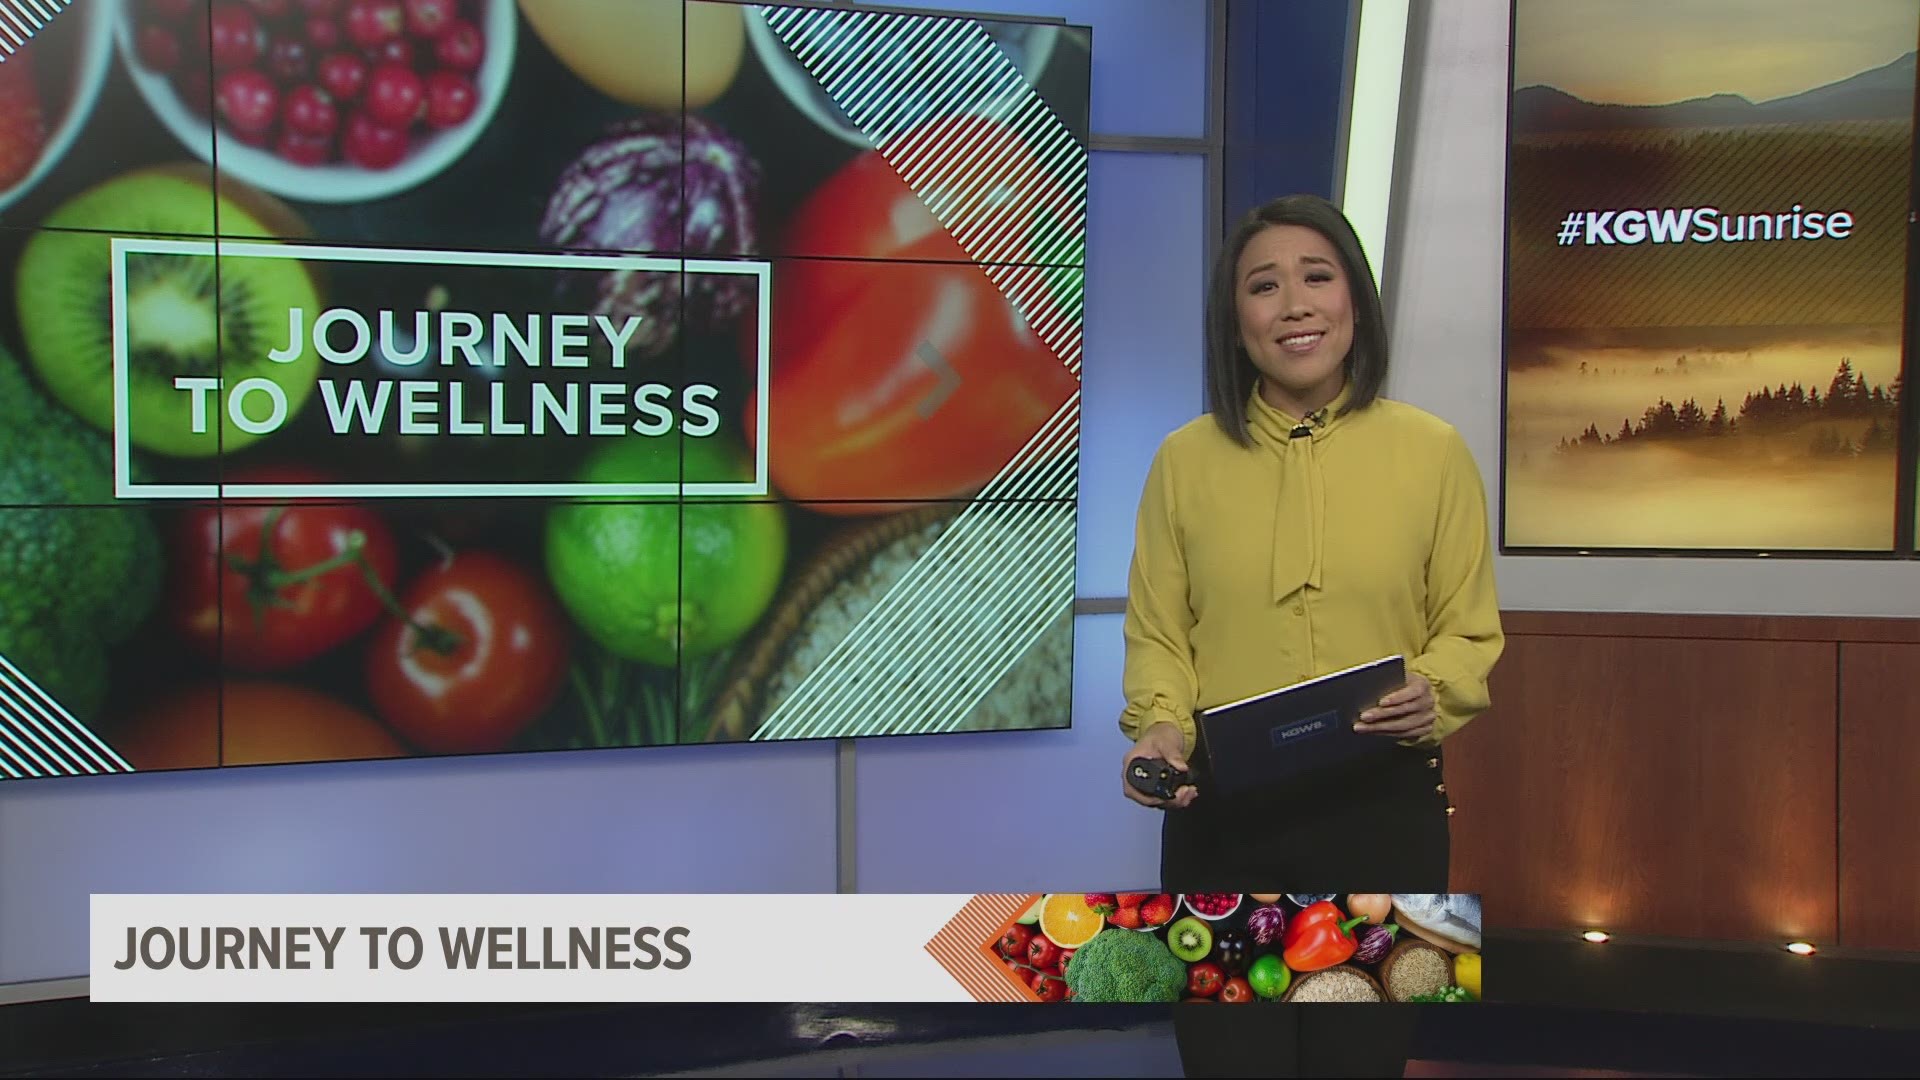 After a bit of research, KGW's Christine Pitawanich, diagnosed as prediabetic at age 33, learned many foods are packed with sugar.